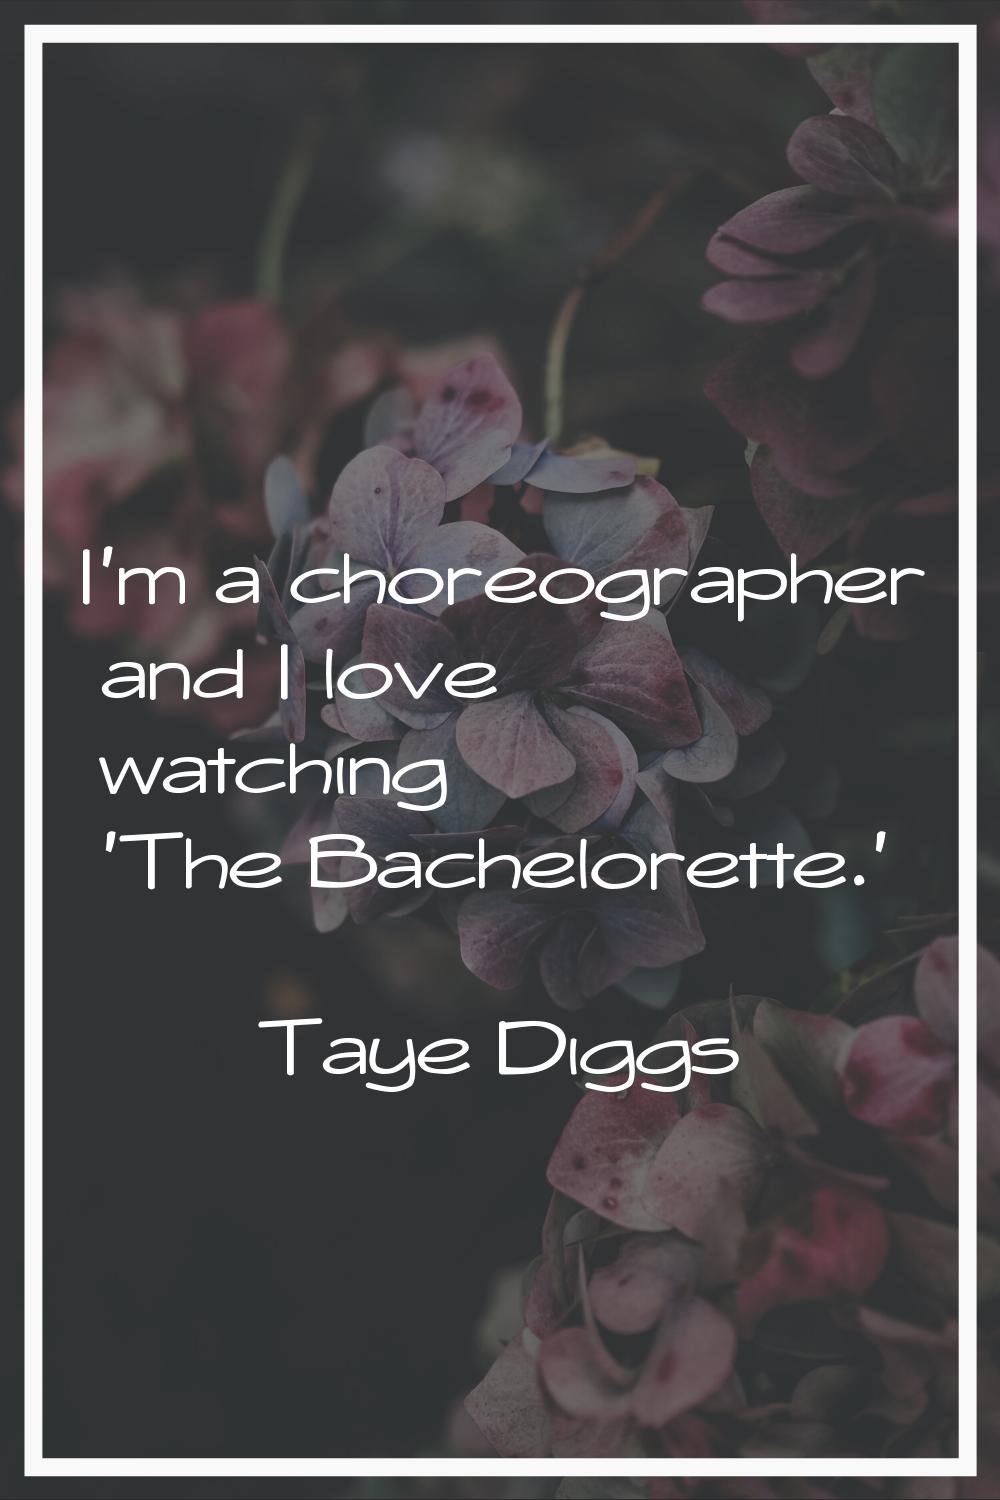 I'm a choreographer and I love watching 'The Bachelorette.'